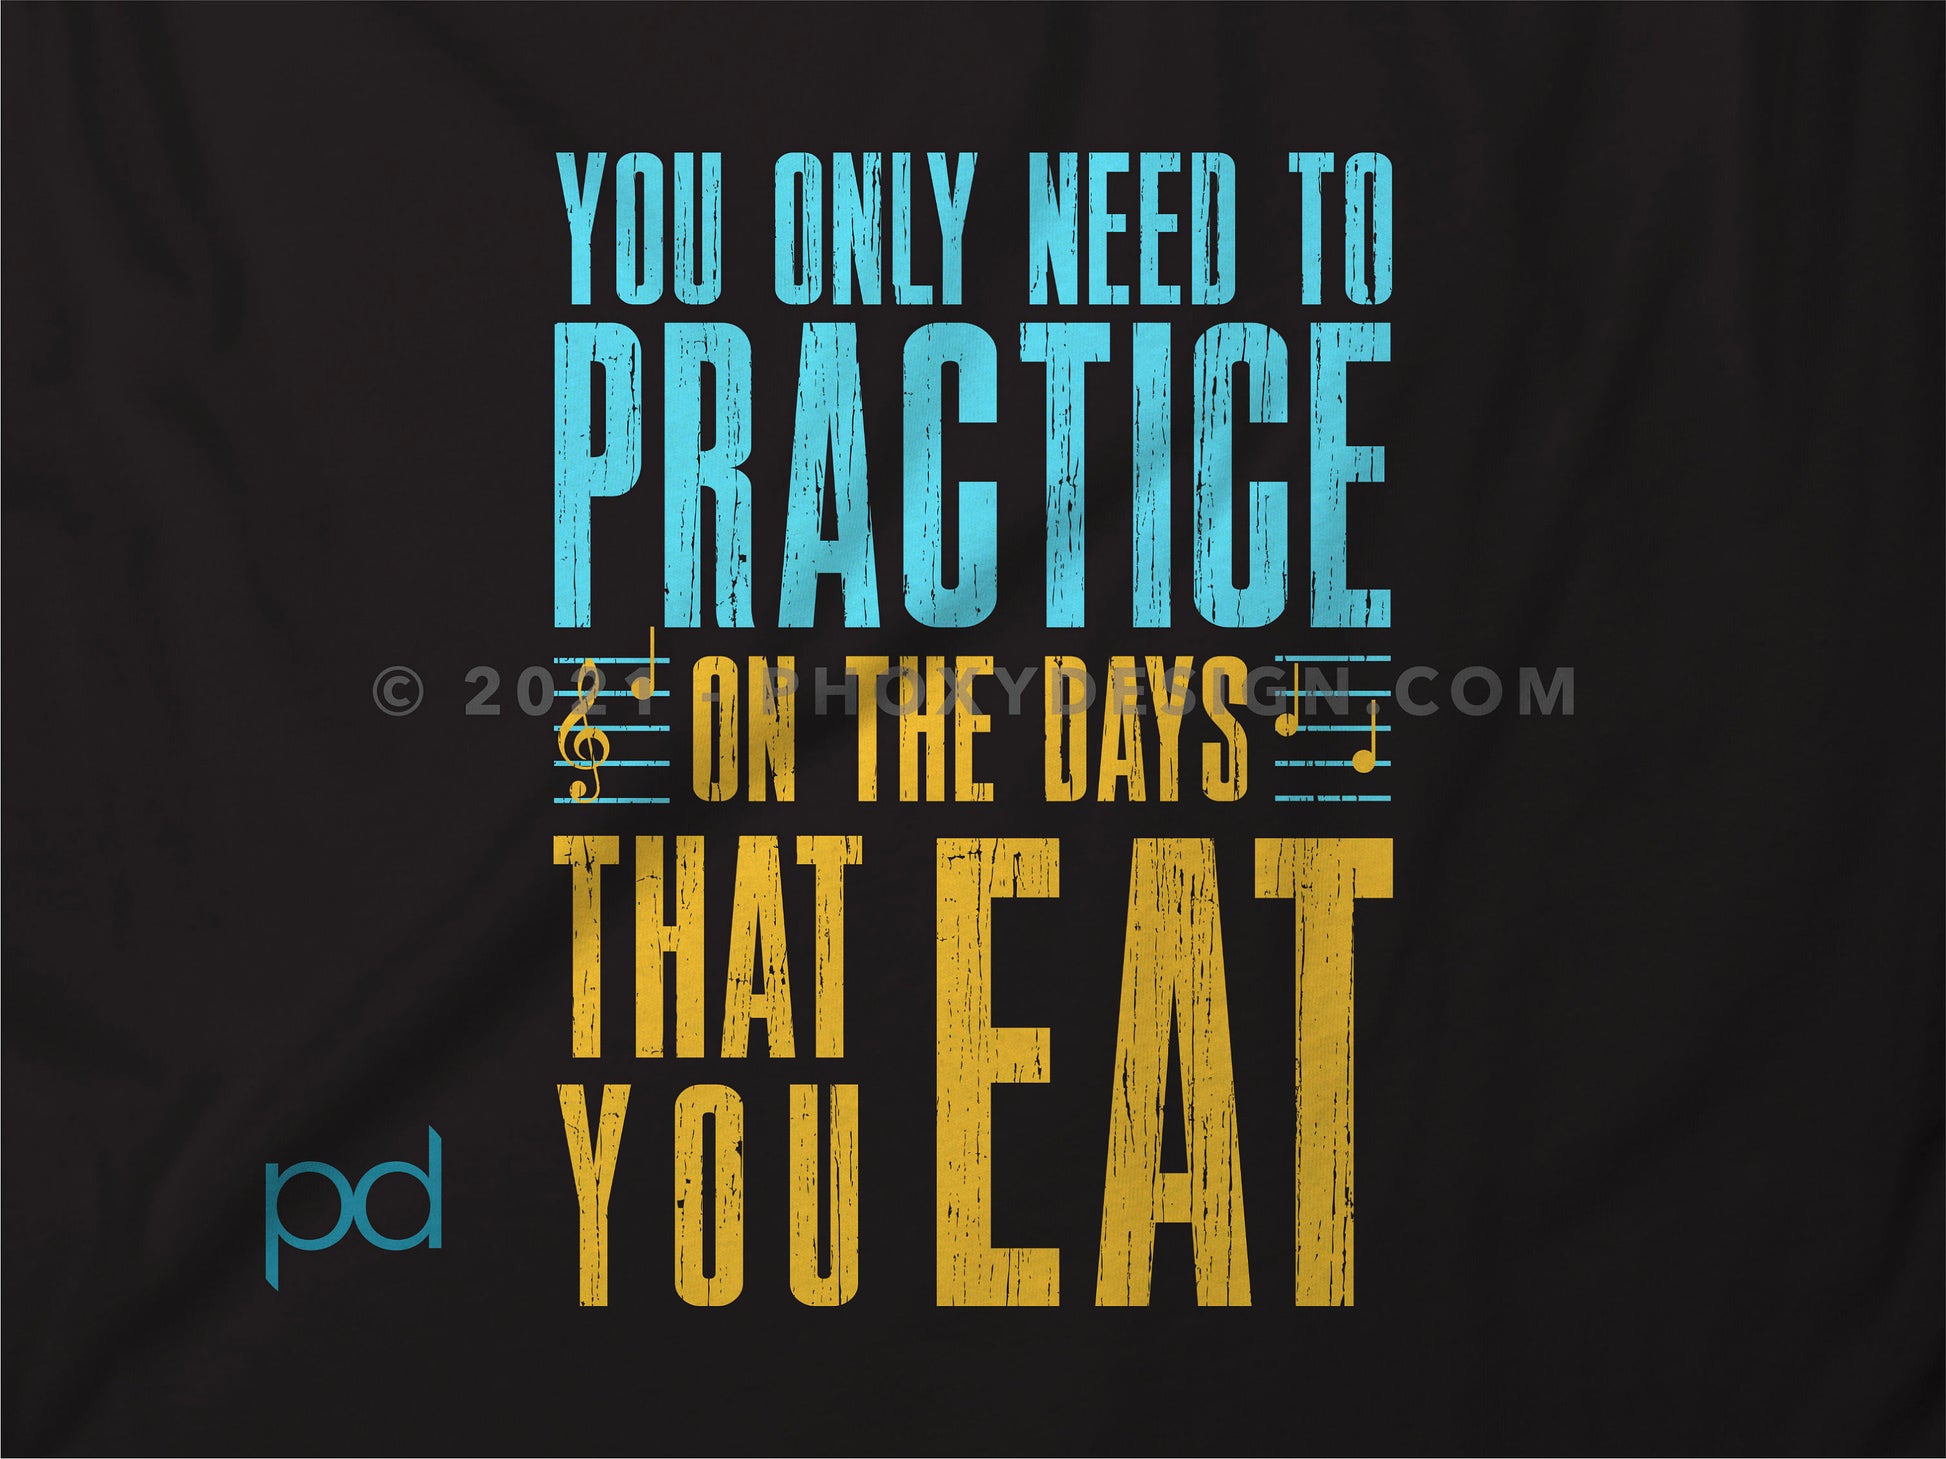 Funny Violin T-Shirt, Violinist Fiddle Player Gift Idea Tee Shirt Top, You Only Need Practice On The Days You Eat